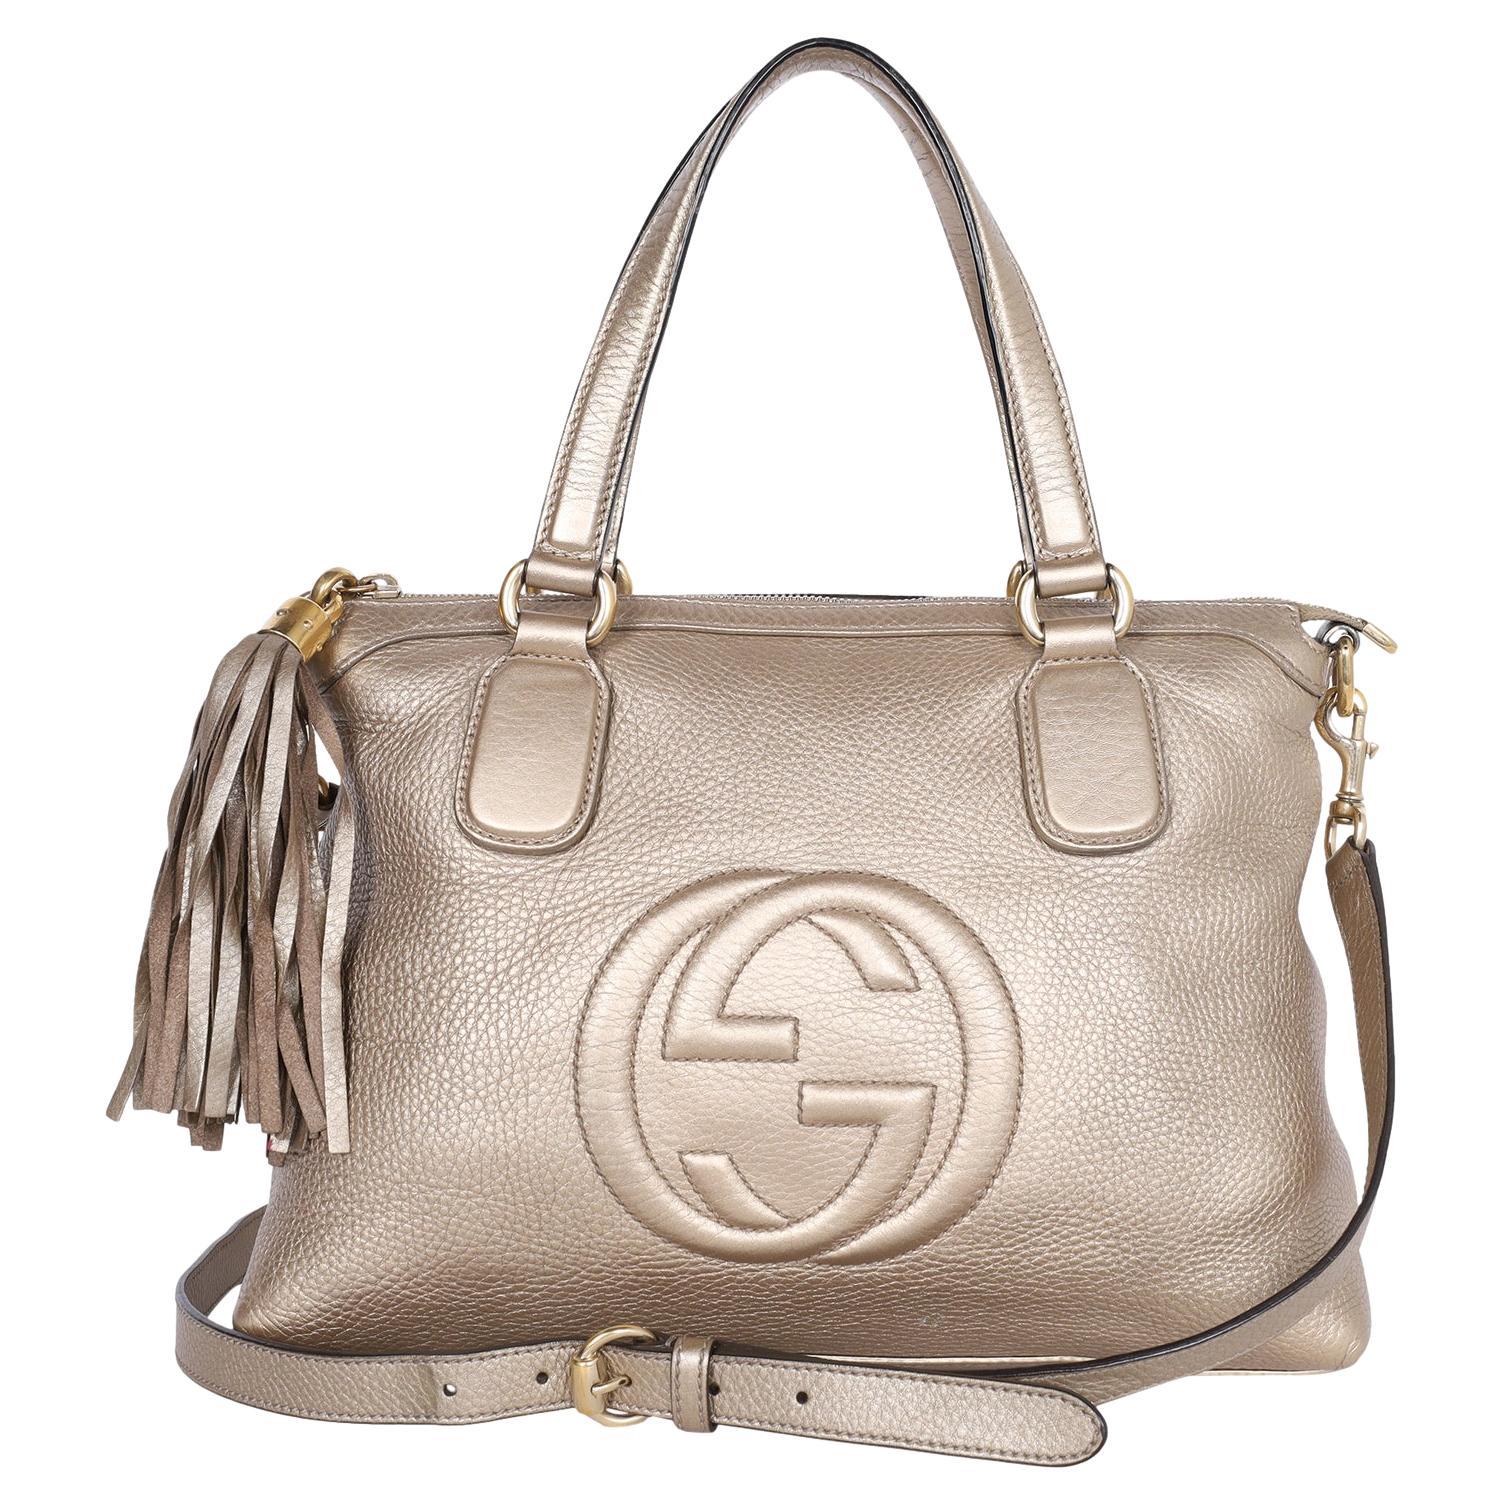 Gucci Soho Metallic Gold Pebbled Calfskin Leather Top Handle Bag For Sale